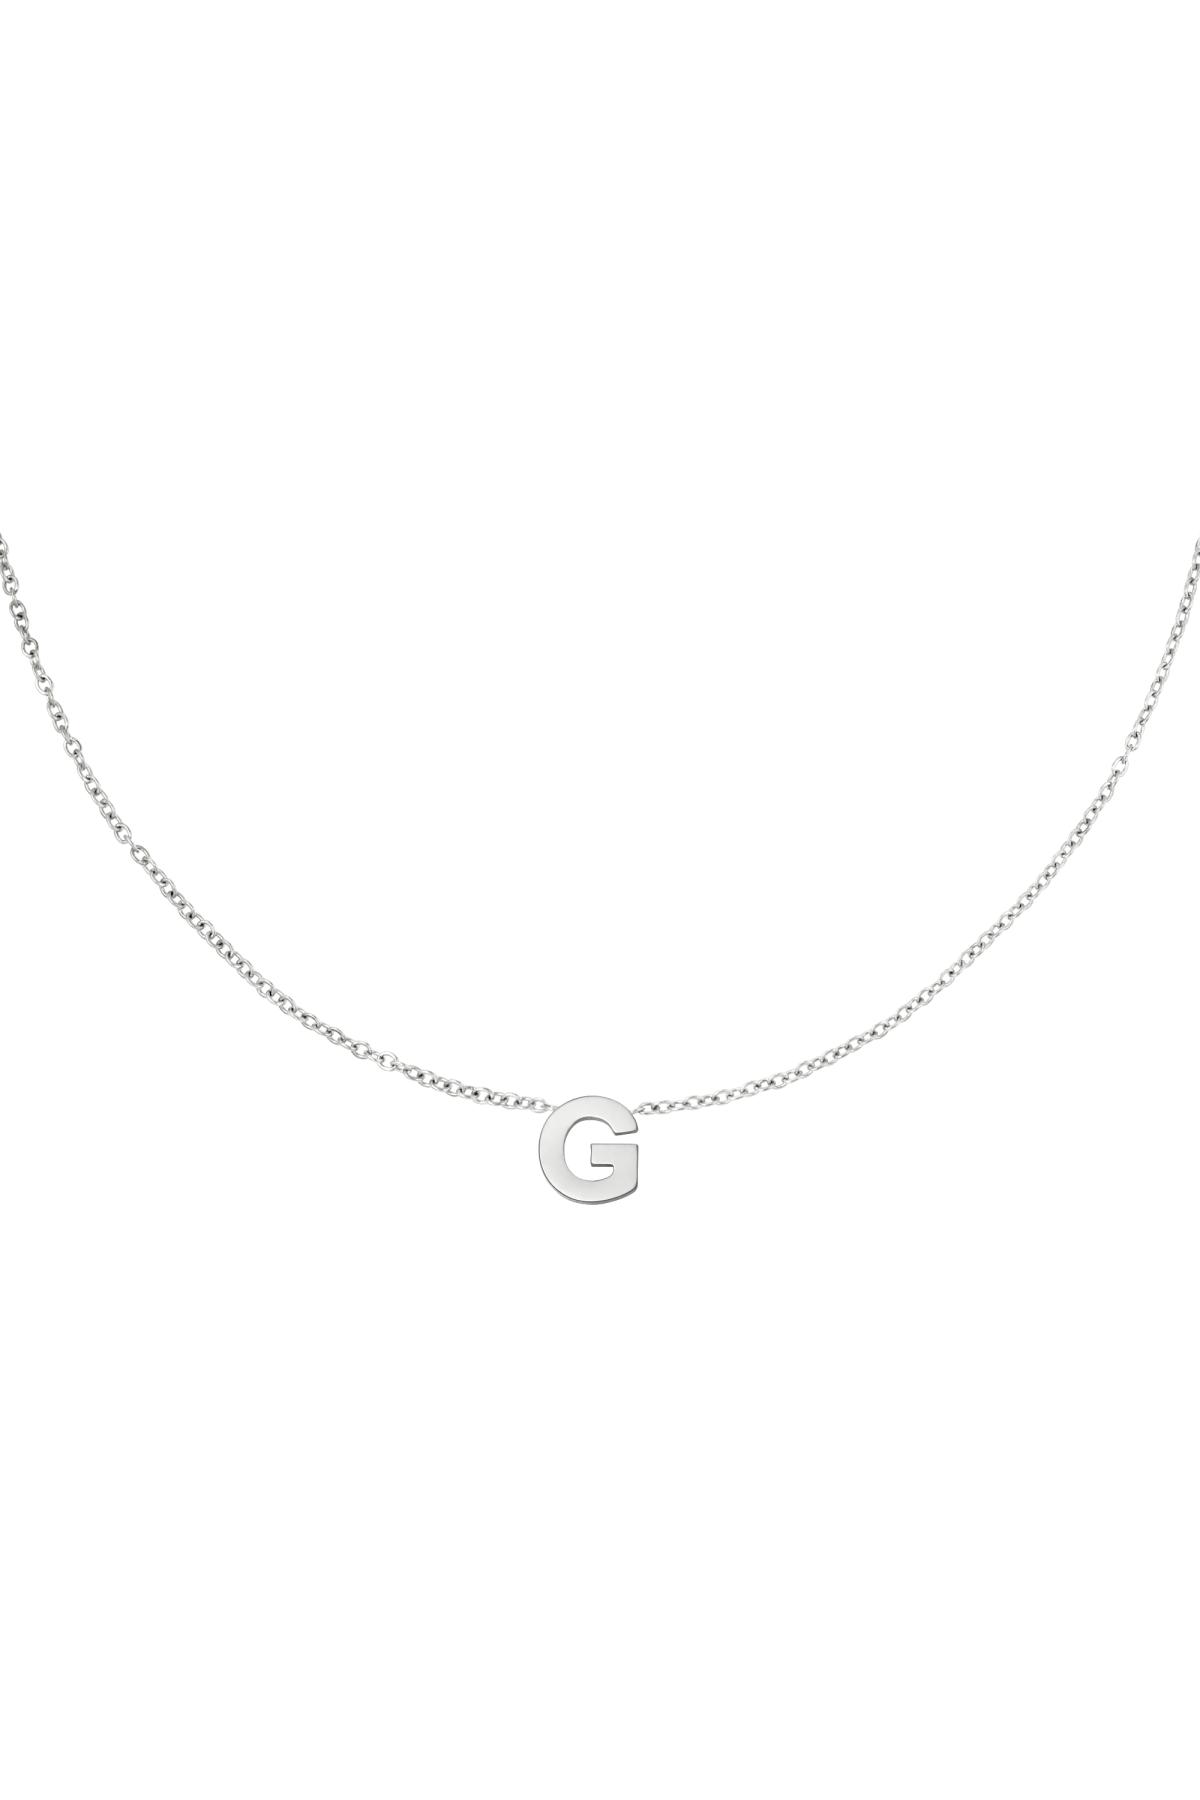 Silver / Stainless steel necklace initial G Silver Picture7